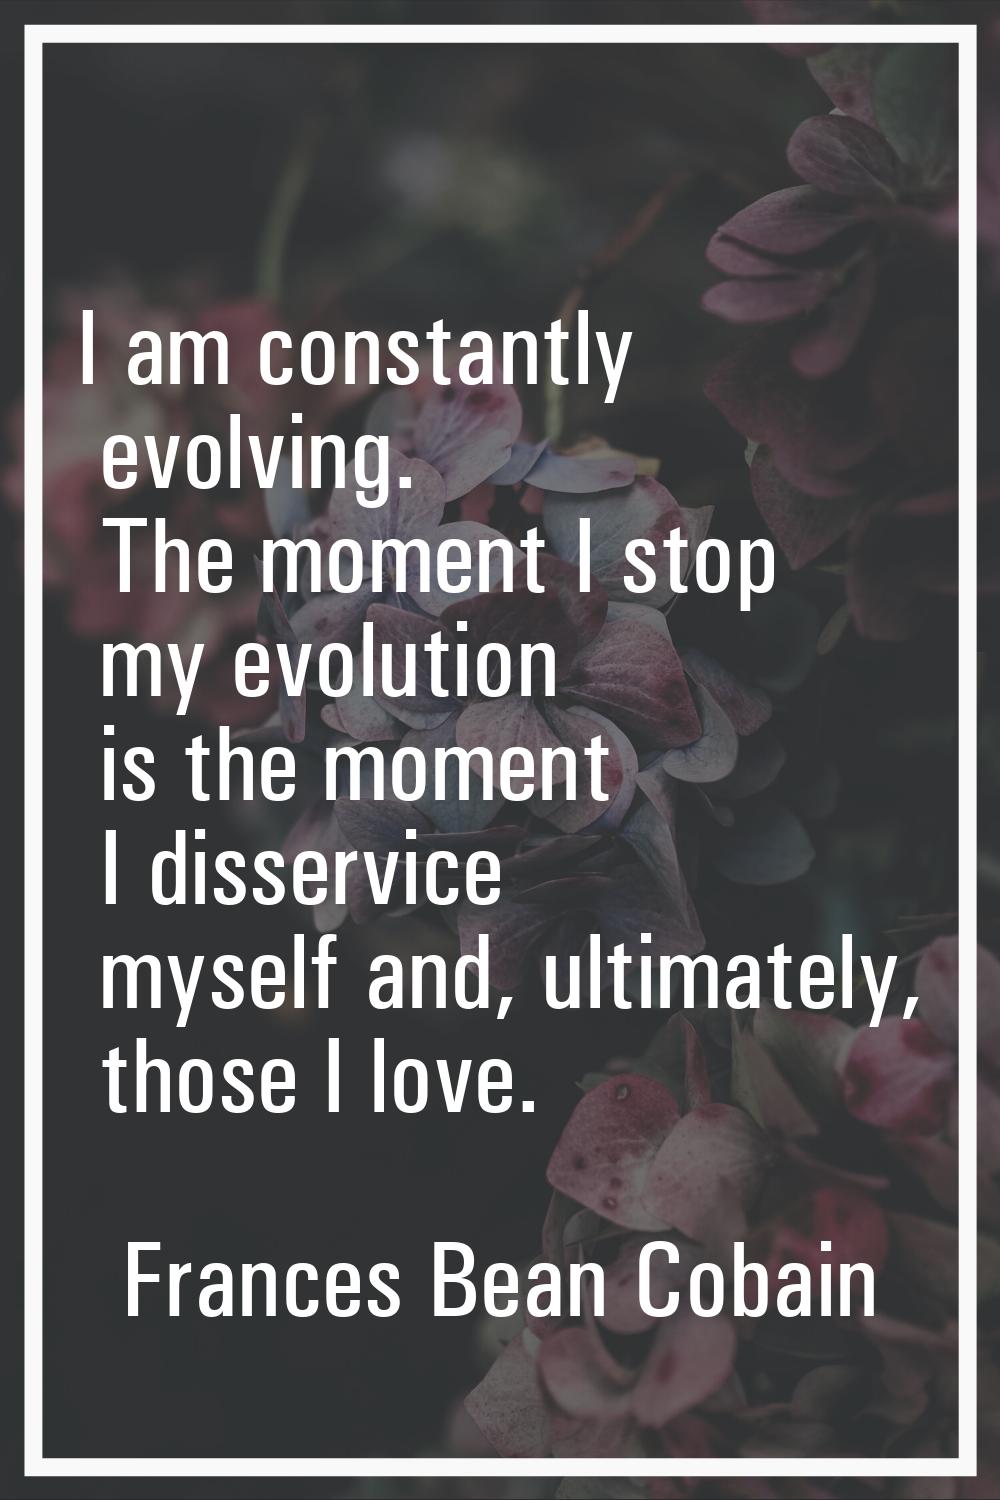 I am constantly evolving. The moment I stop my evolution is the moment I disservice myself and, ult